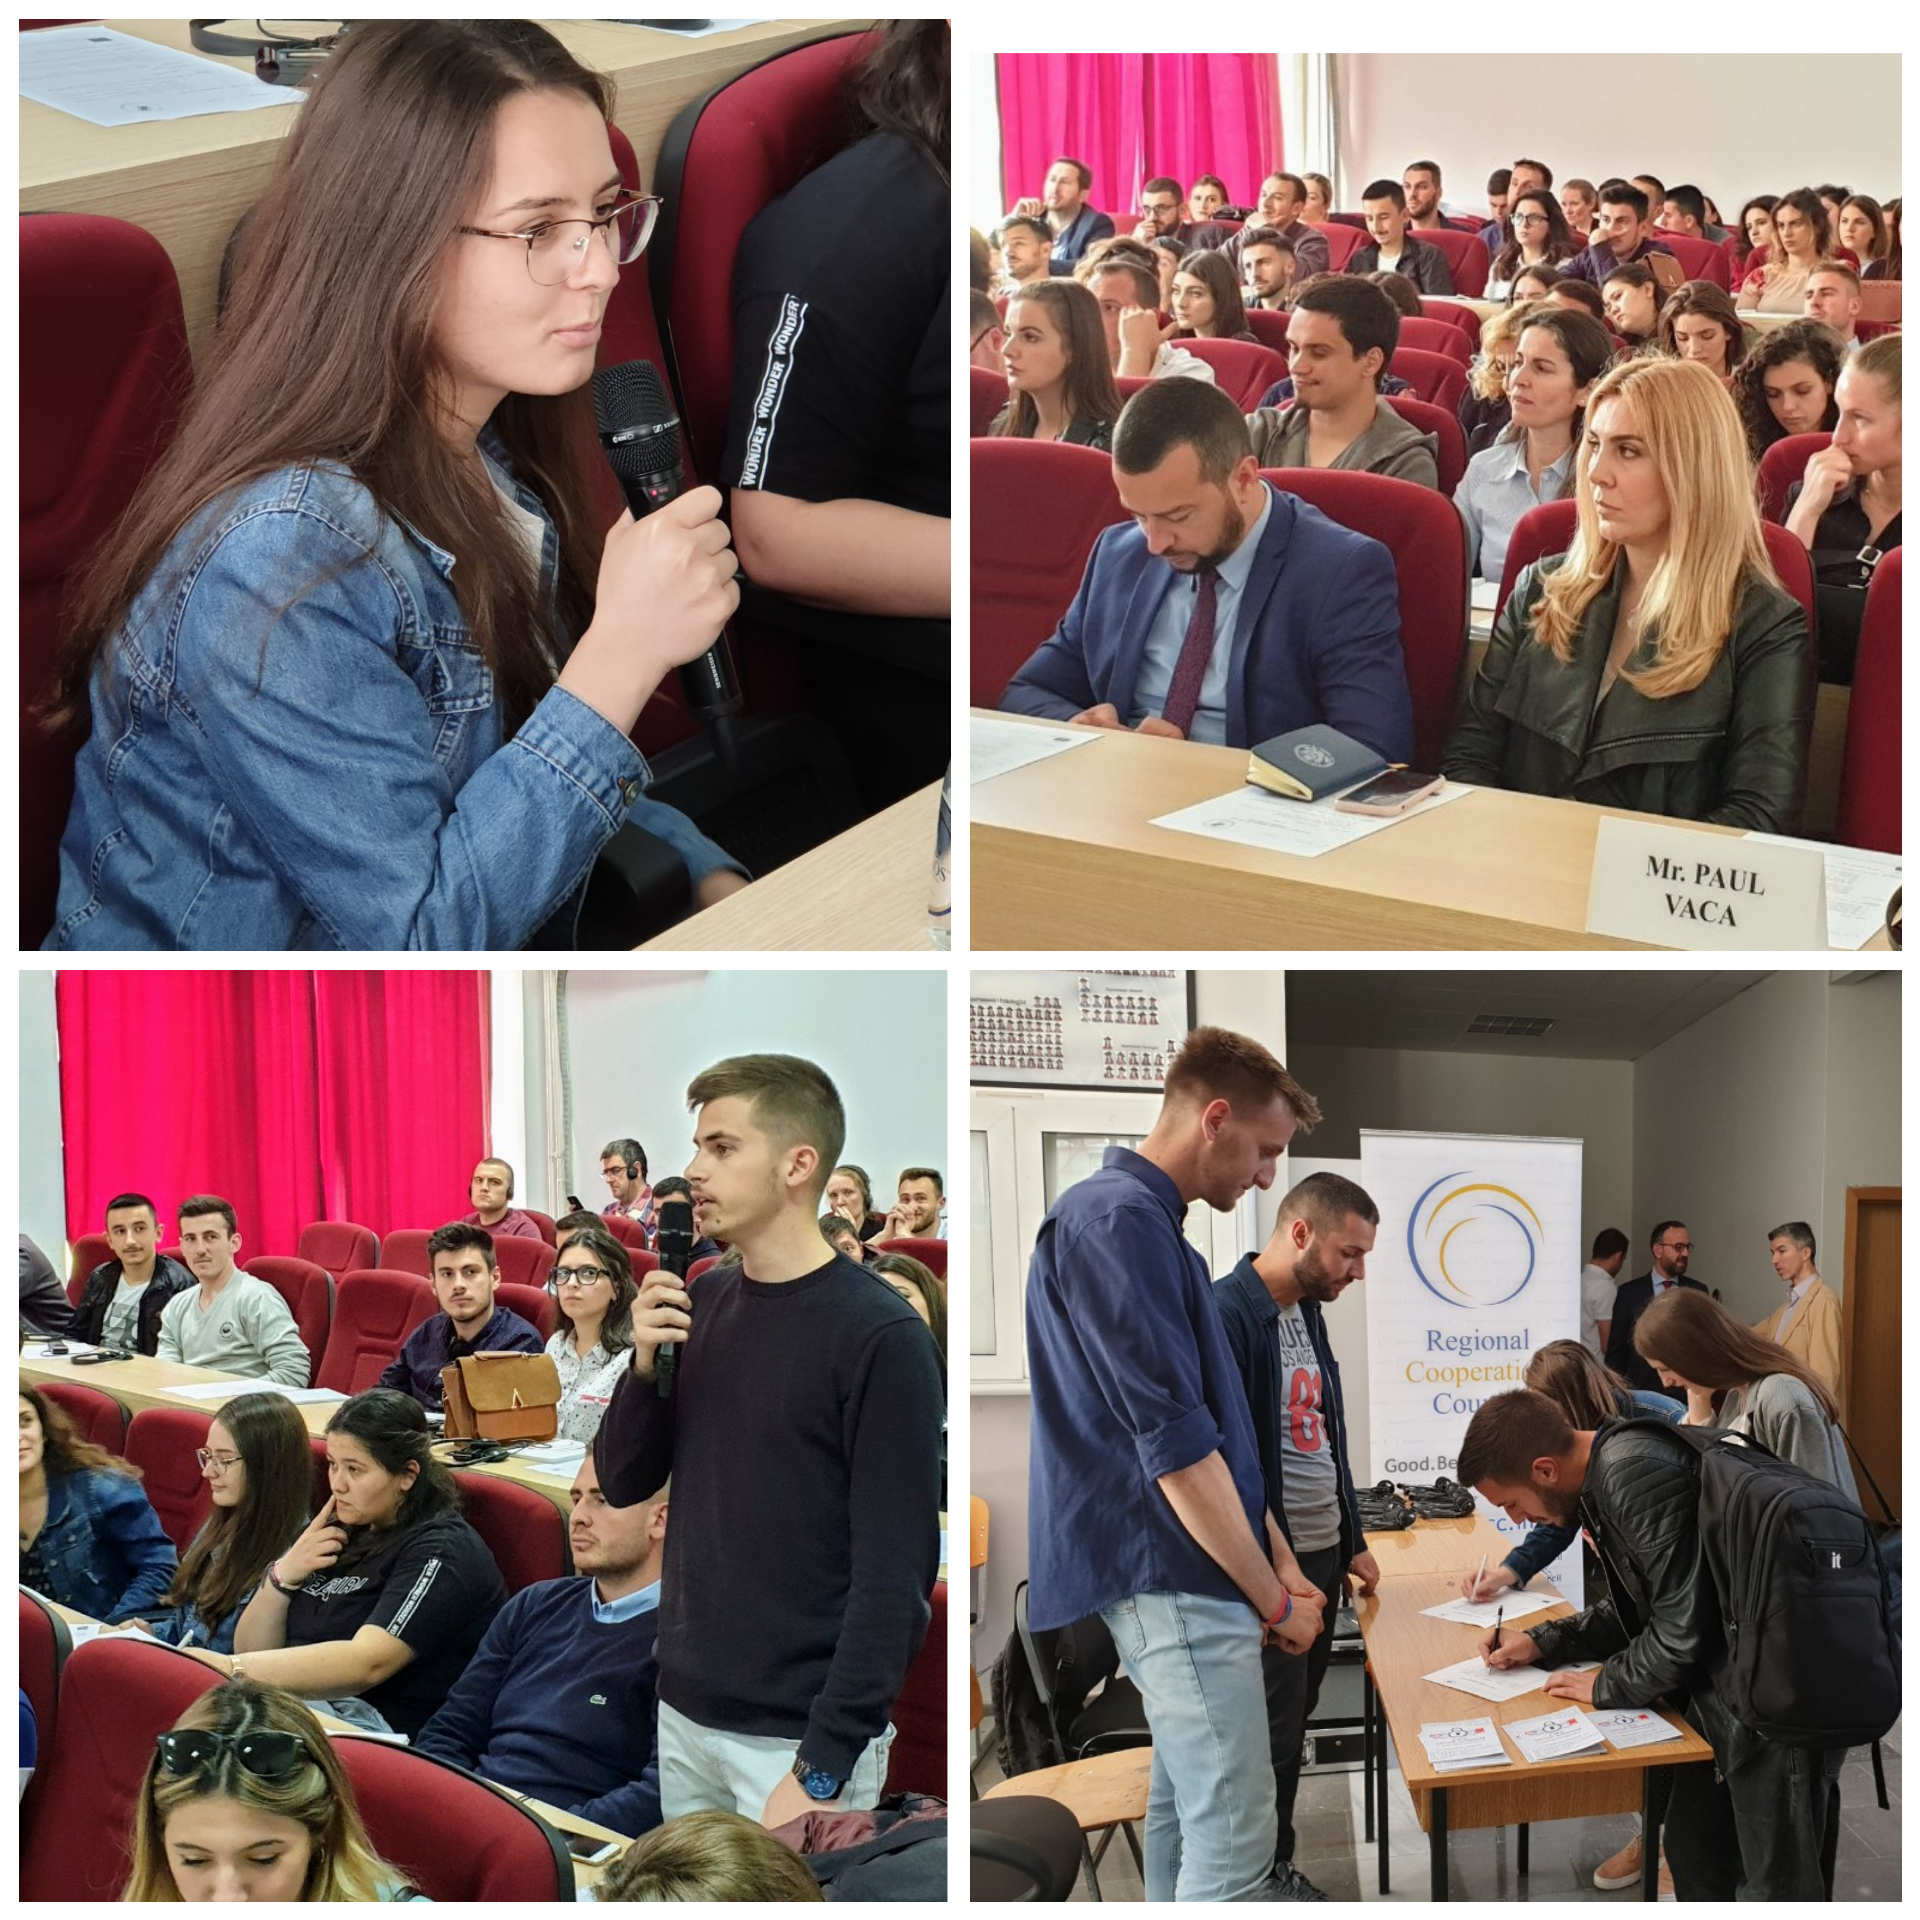 Students engaging in discussion on early signs of radicalisation among youth and how to prevent it at the workshop organized in Pristina on 22 May 2019 (Photo: RCC/Natasa Mitrovic)